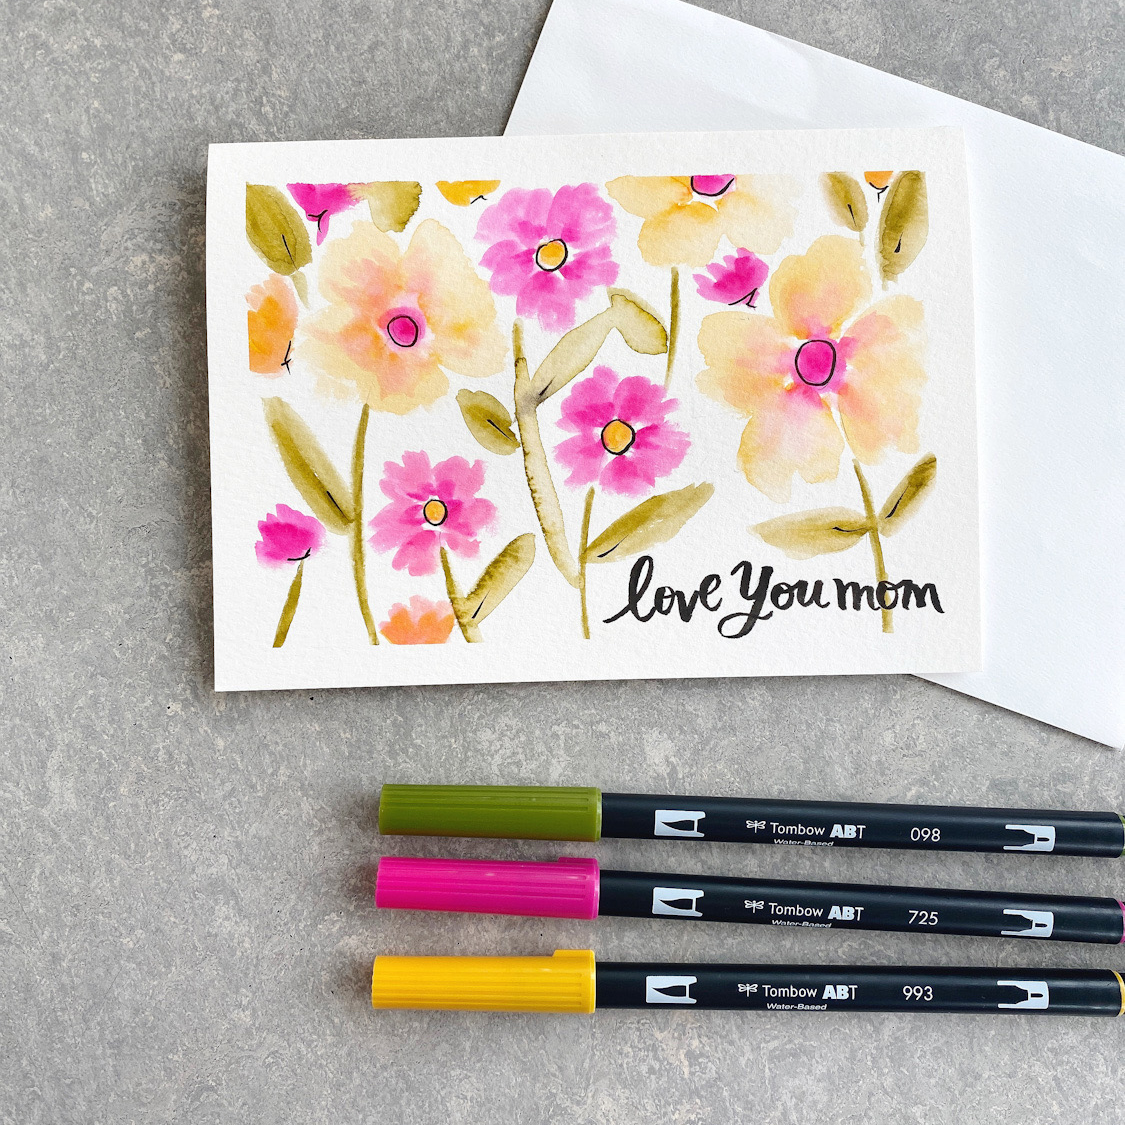 Brush Pen Drawing: Easy Floral Frame +3 More Ideas!